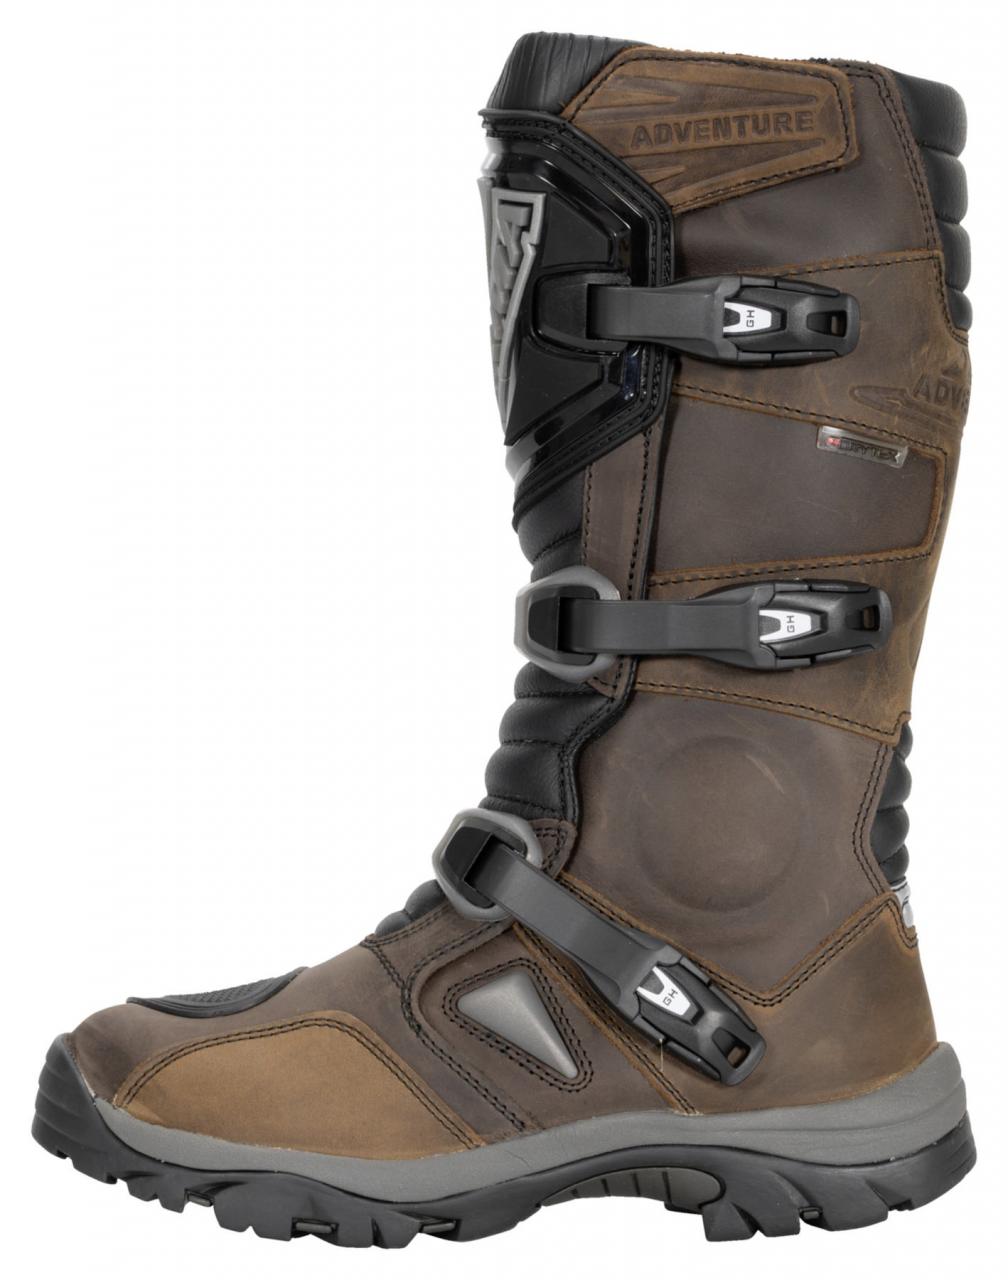 Forma Adventure Boot Review - Adventure Motorcycle Magazine